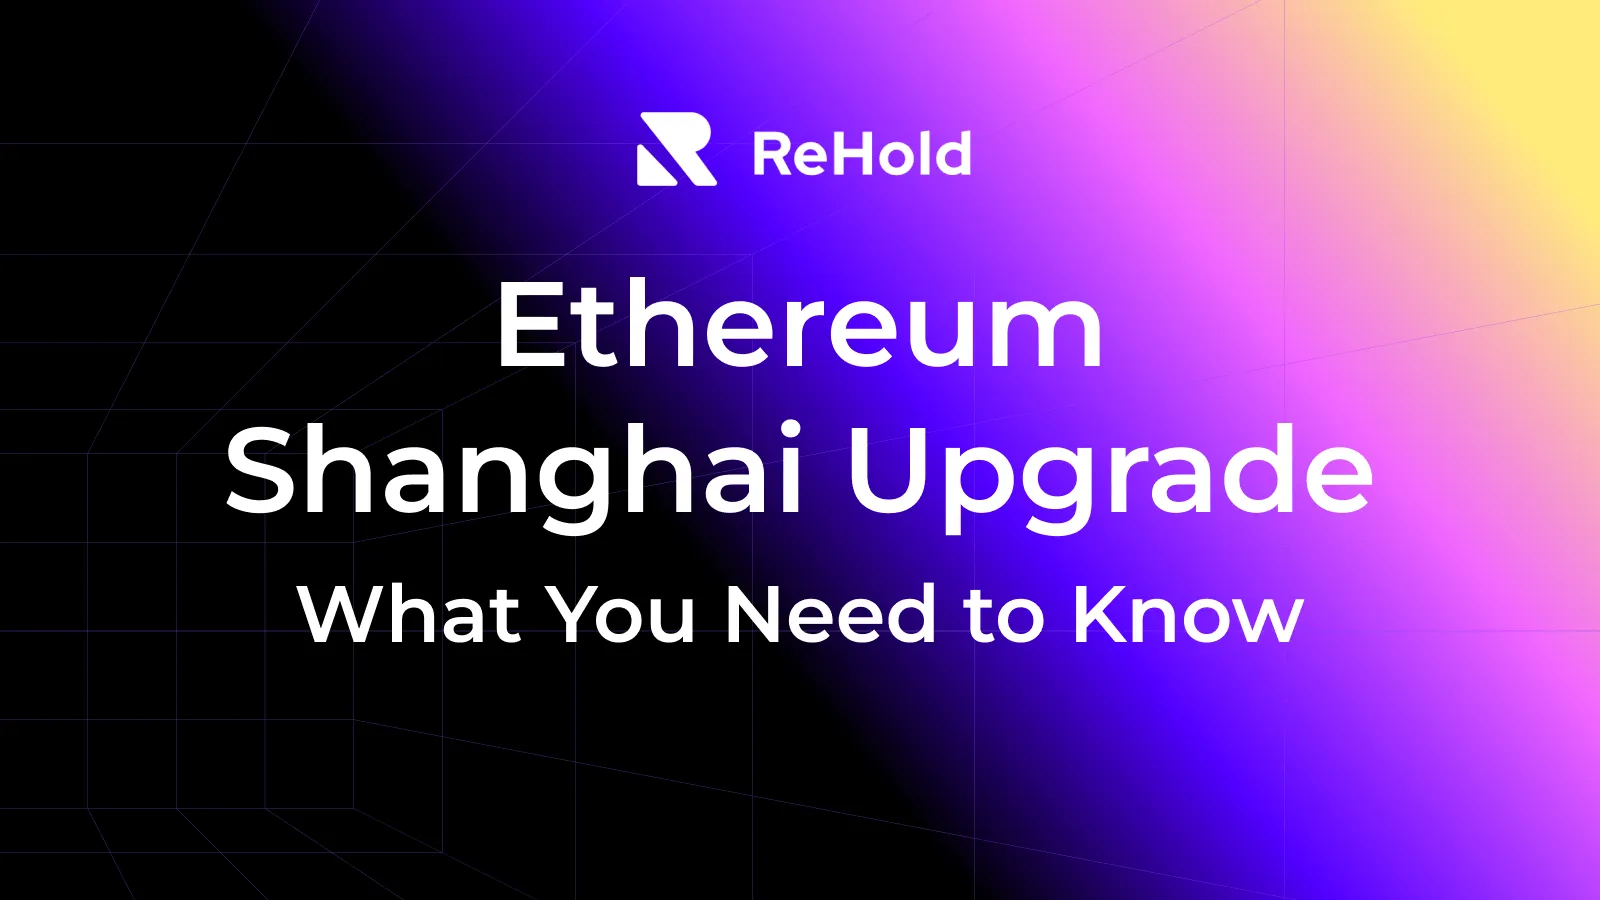 What You Need to Know About Ethereum's Shanghai Upgrade